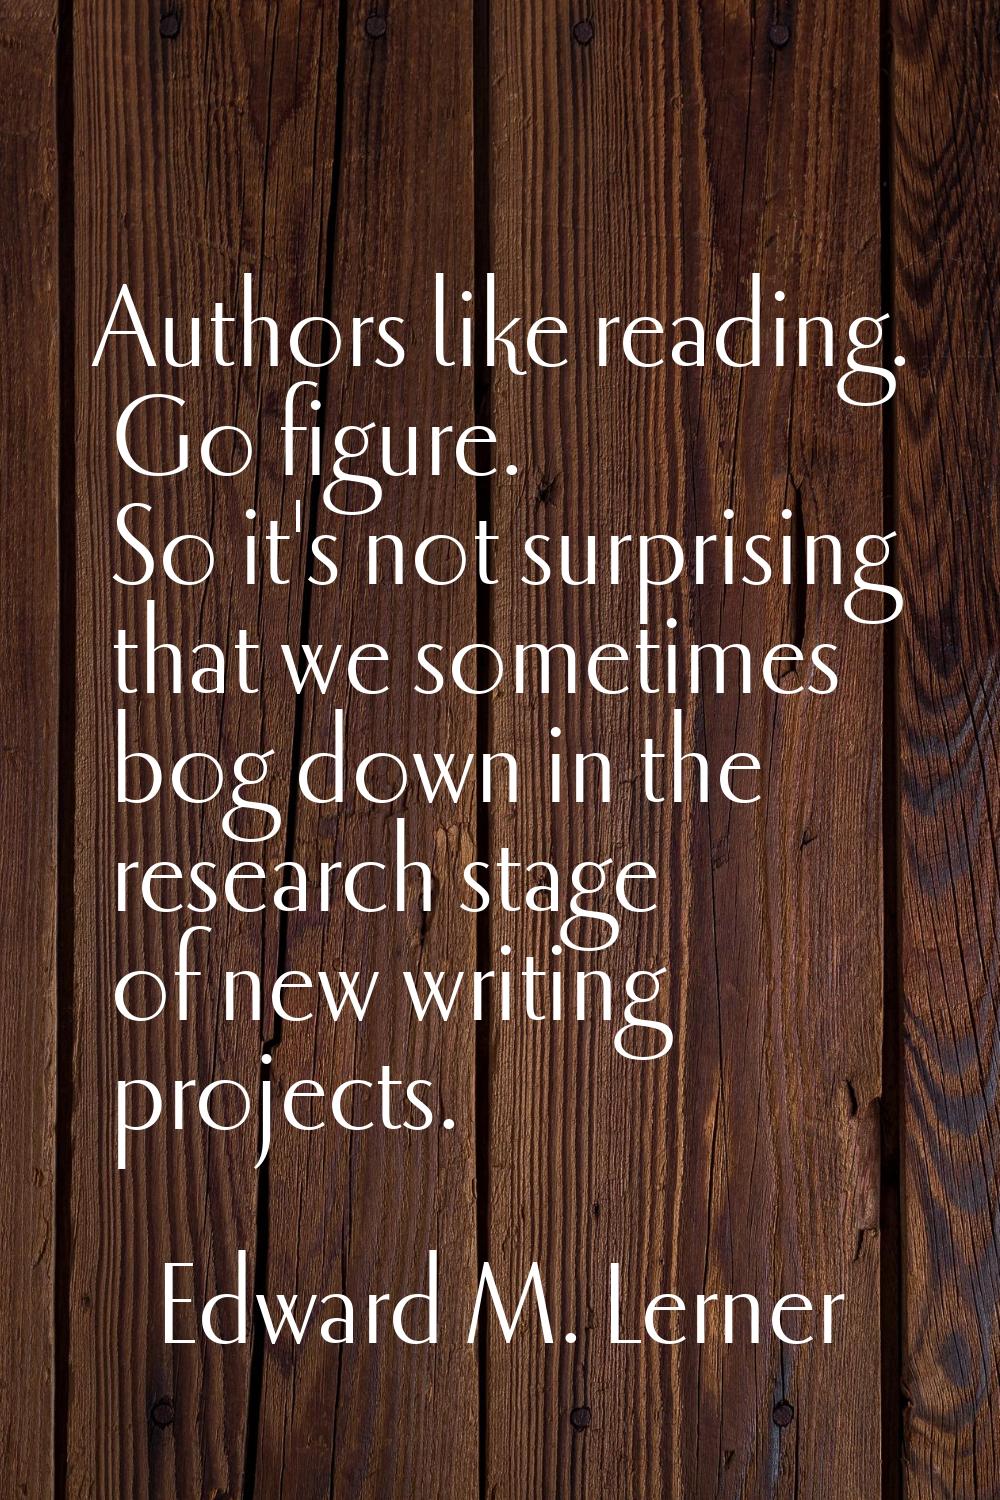 Authors like reading. Go figure. So it's not surprising that we sometimes bog down in the research 